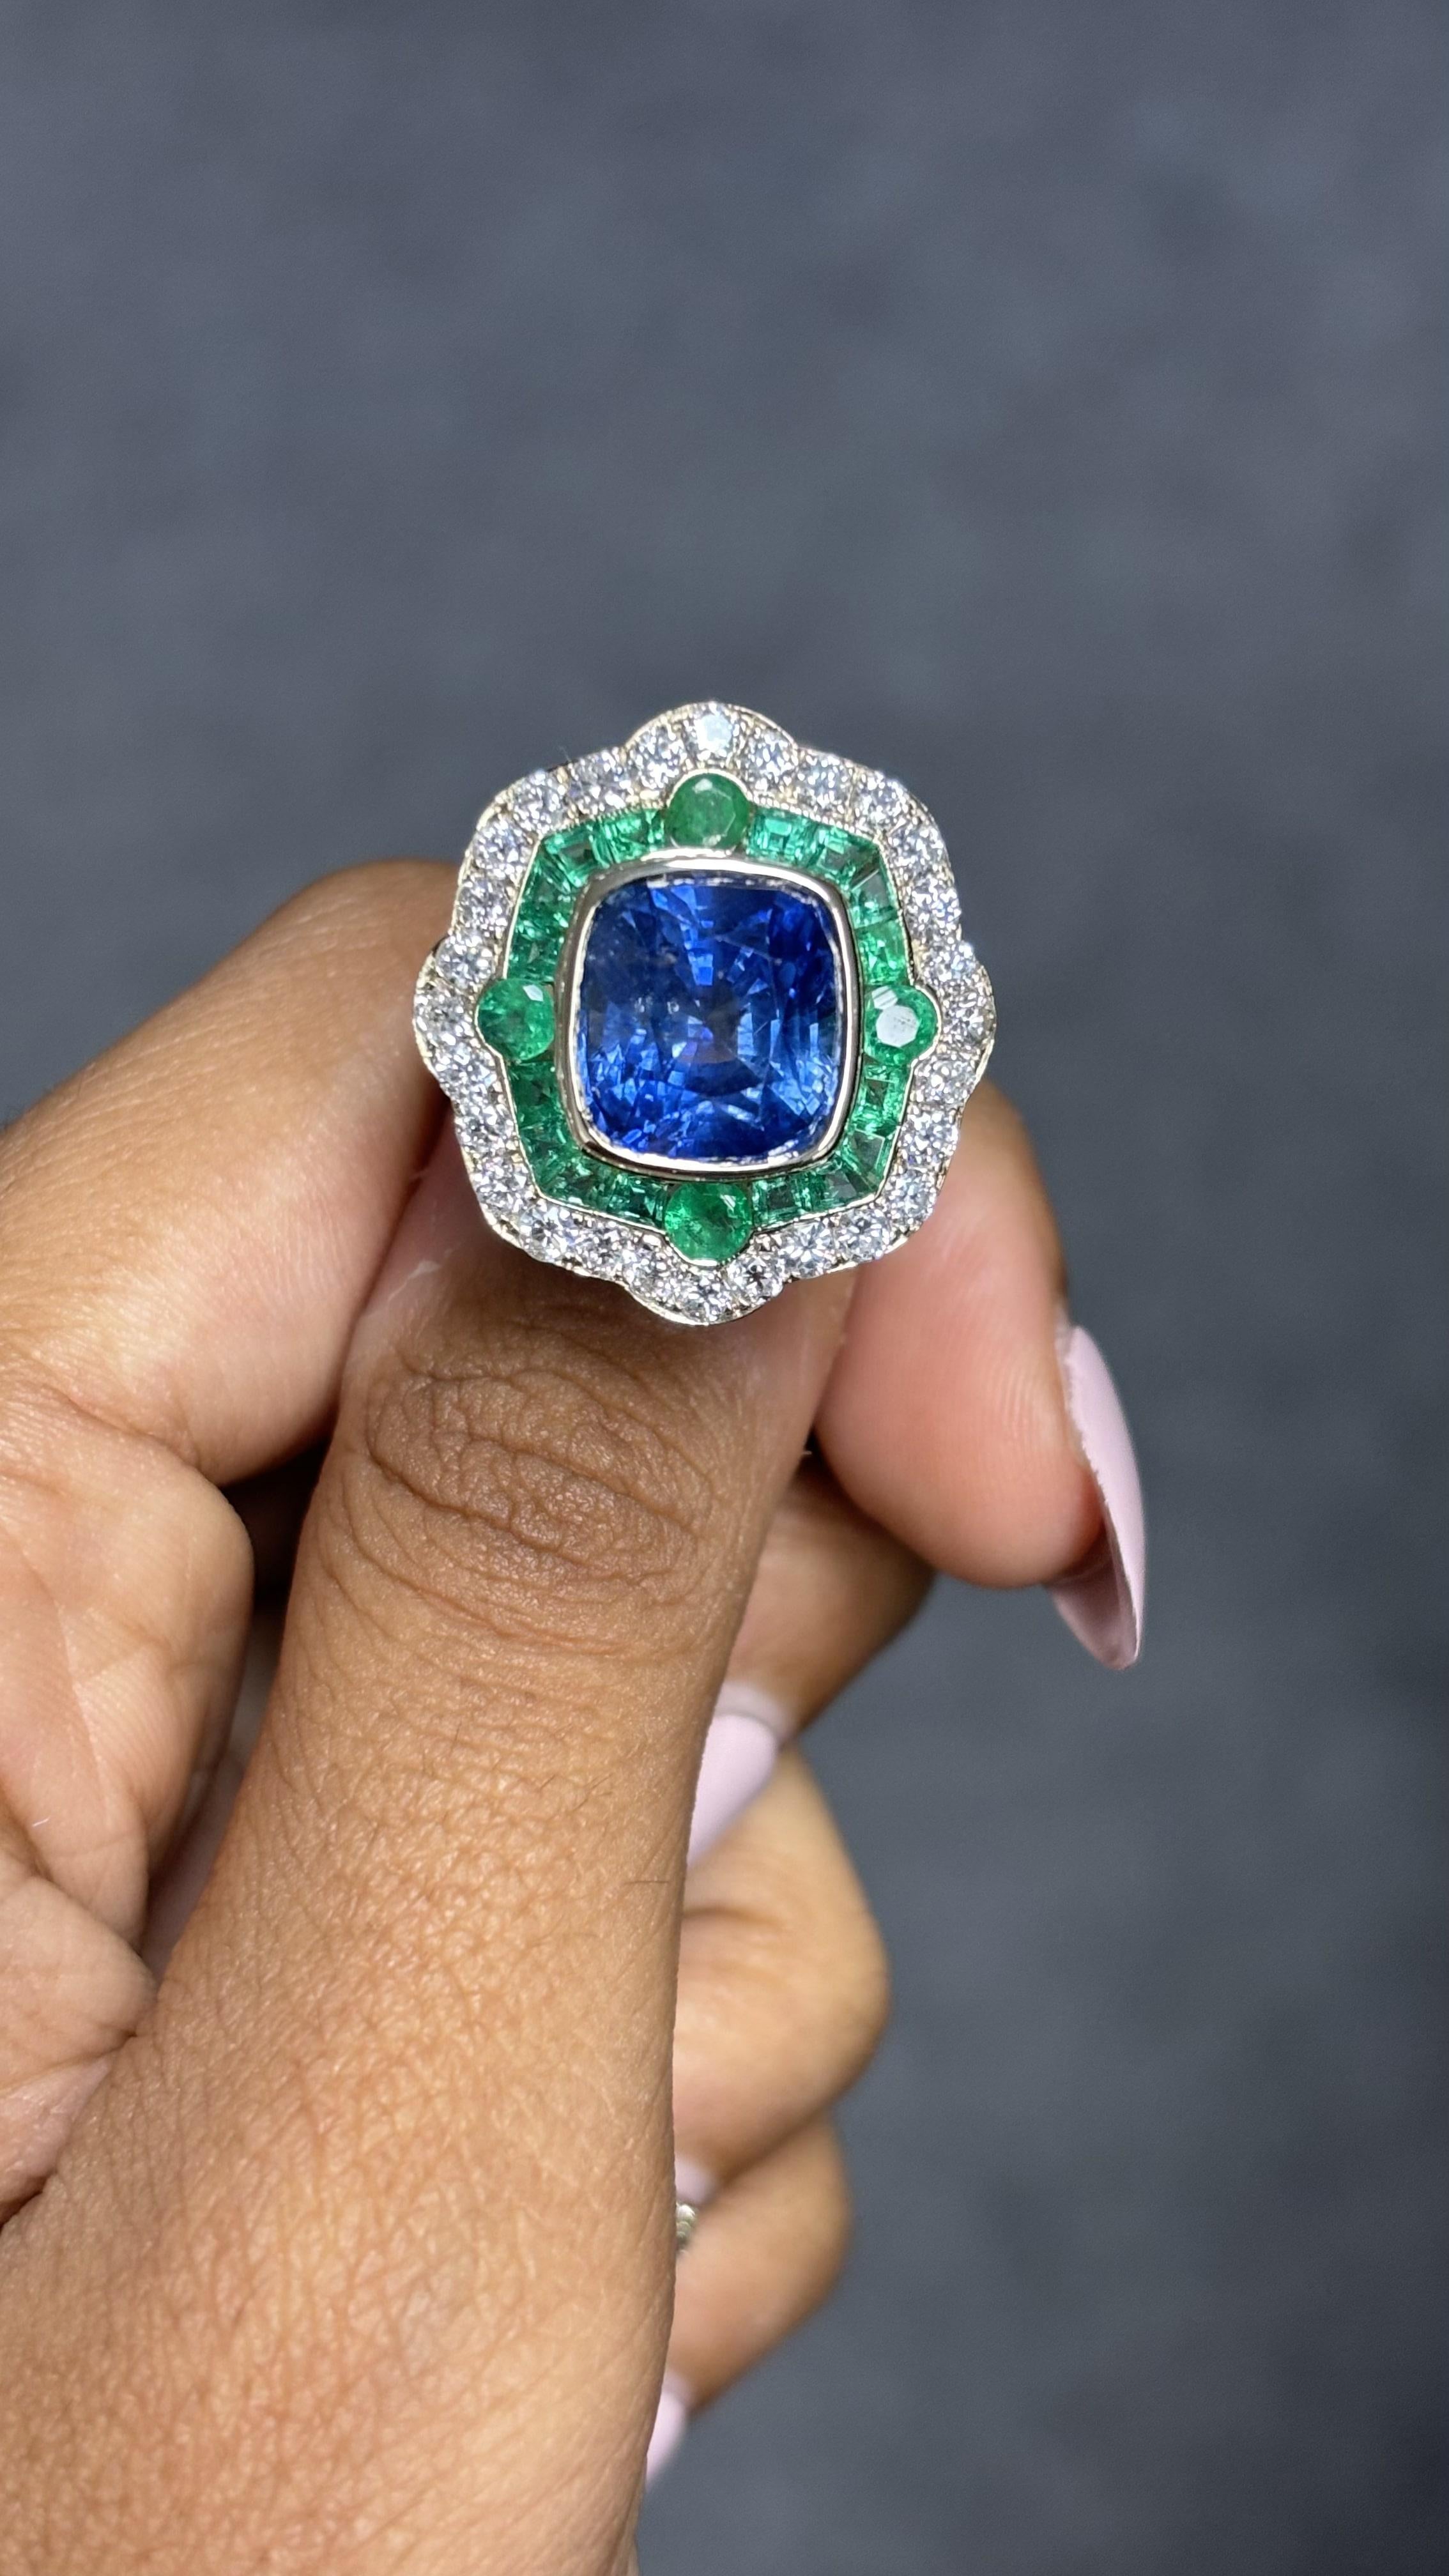 Presenting a remarkable statement ring meticulously handcrafted to evoke a captivating antique aesthetic. This extraordinary piece showcases a 6.28 carat Sapphire, originating from Sri Lanka, which has undergone standard heat treatment only.

The